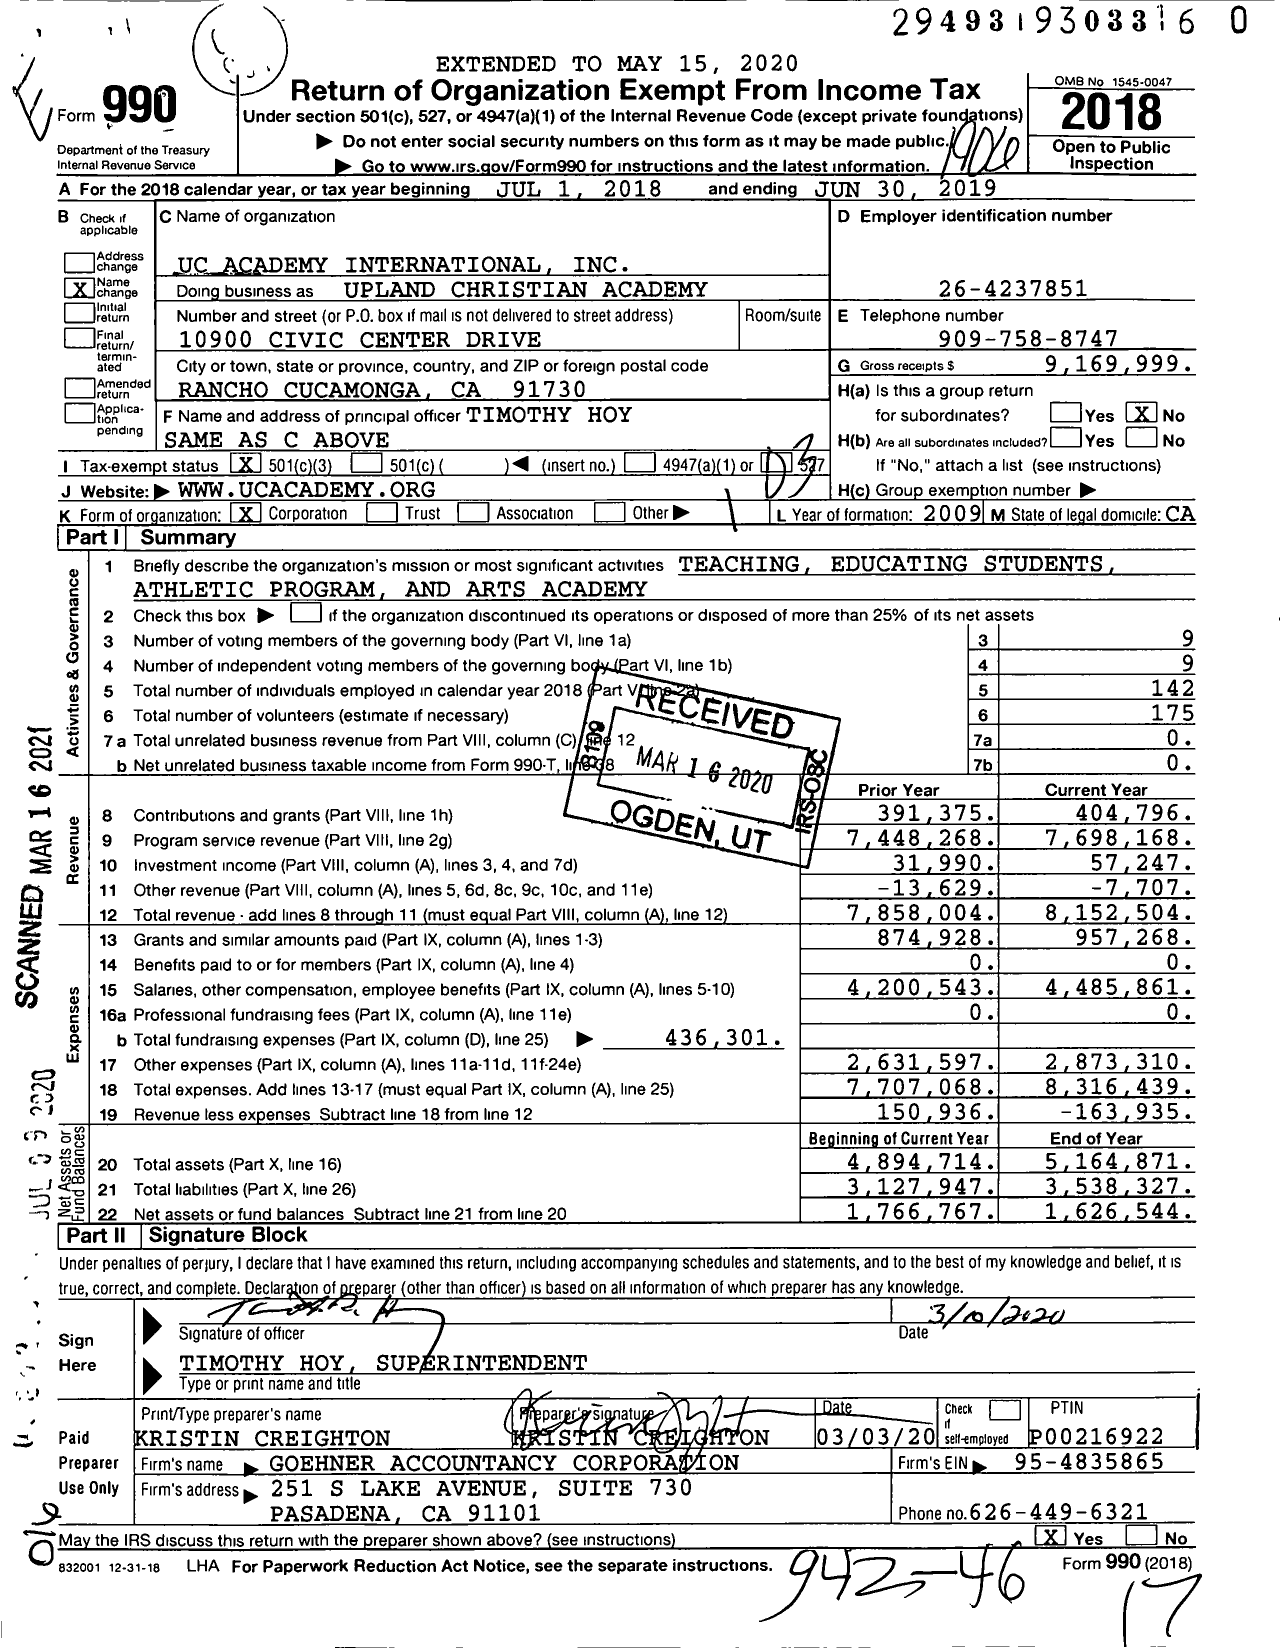 Image of first page of 2018 Form 990 for United Christian Academy / Uc Academy International Inc